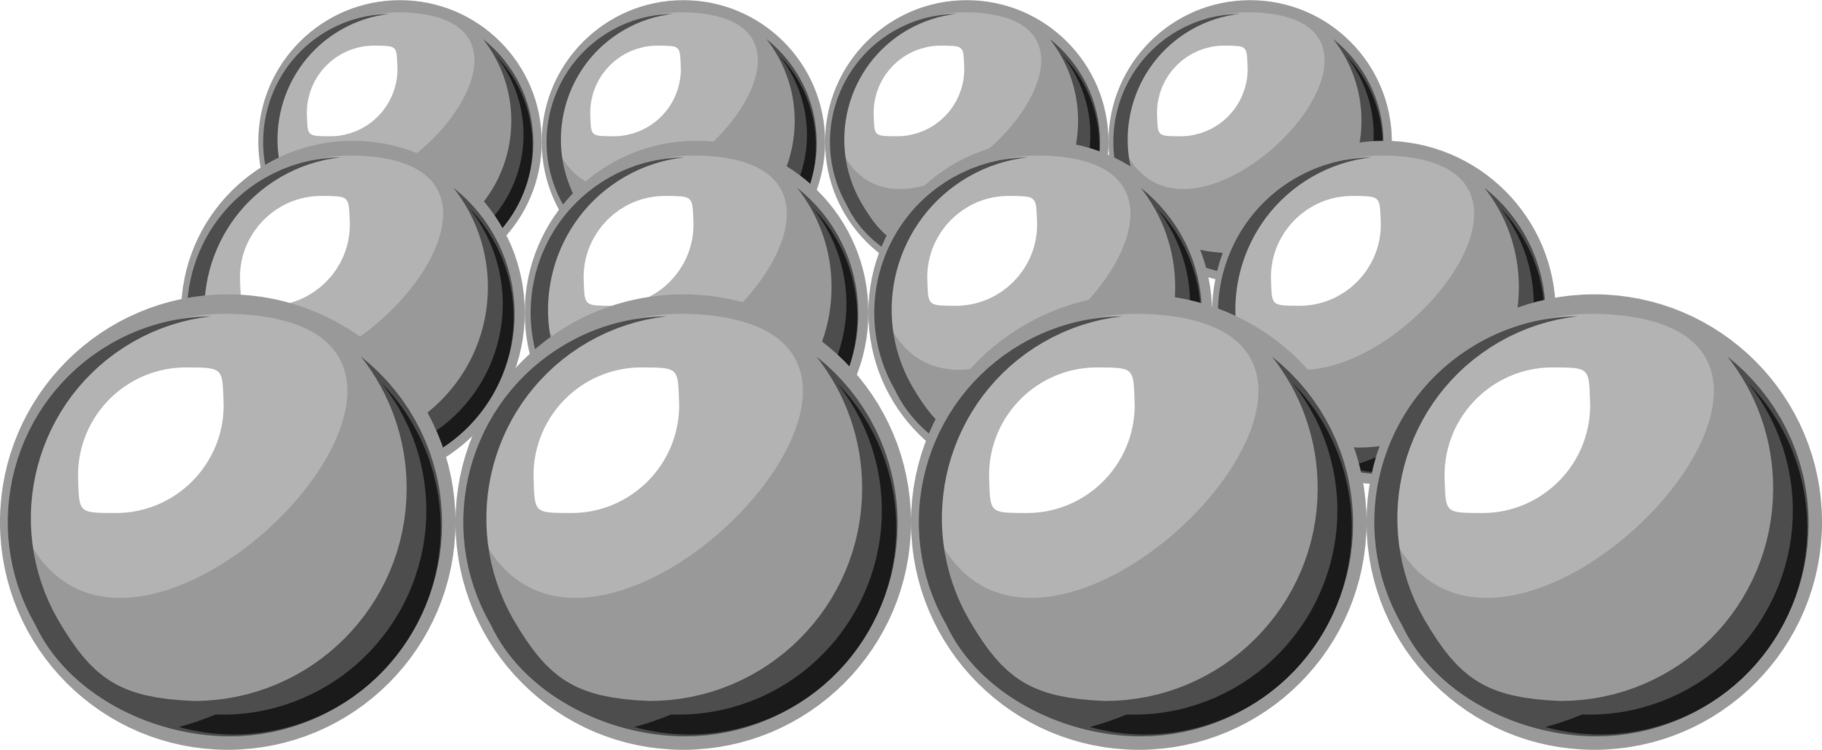 A Group Of Silver Balls